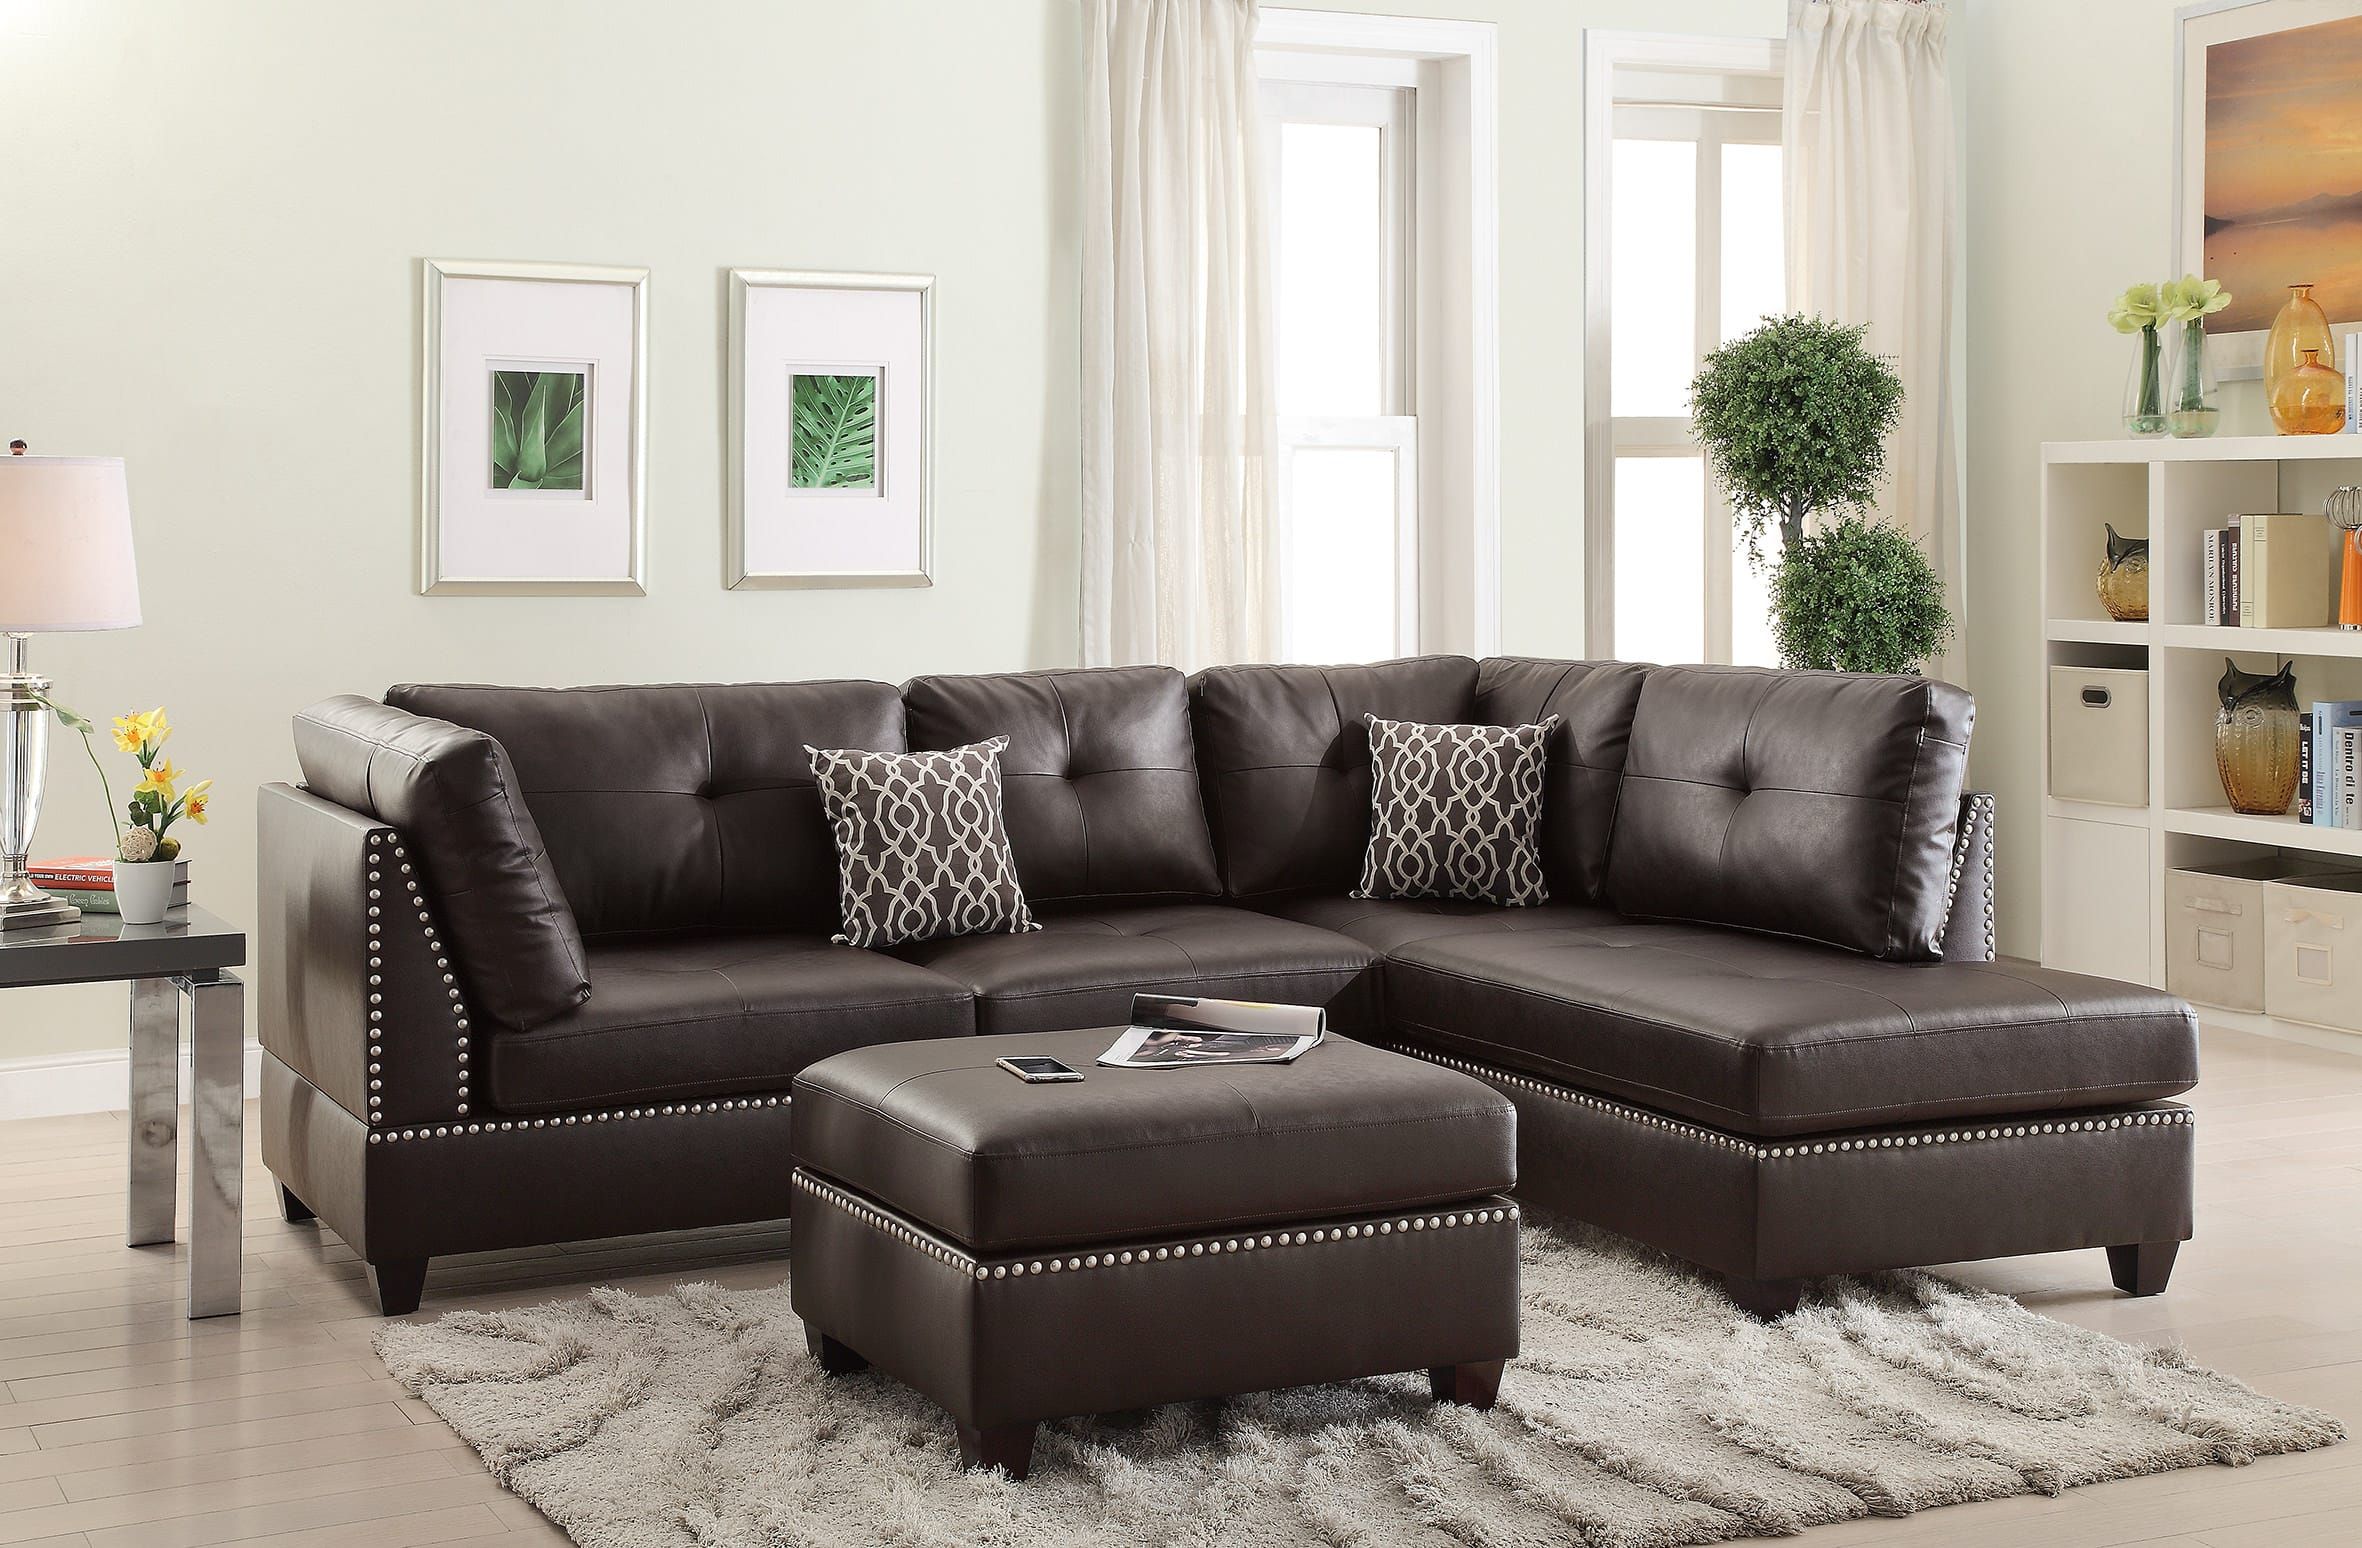 F6973 Espresso 3 Pcs Sectional Sofa Setpoundex Throughout 3 Piece Leather Sectional Sofa Sets (Photo 11 of 15)